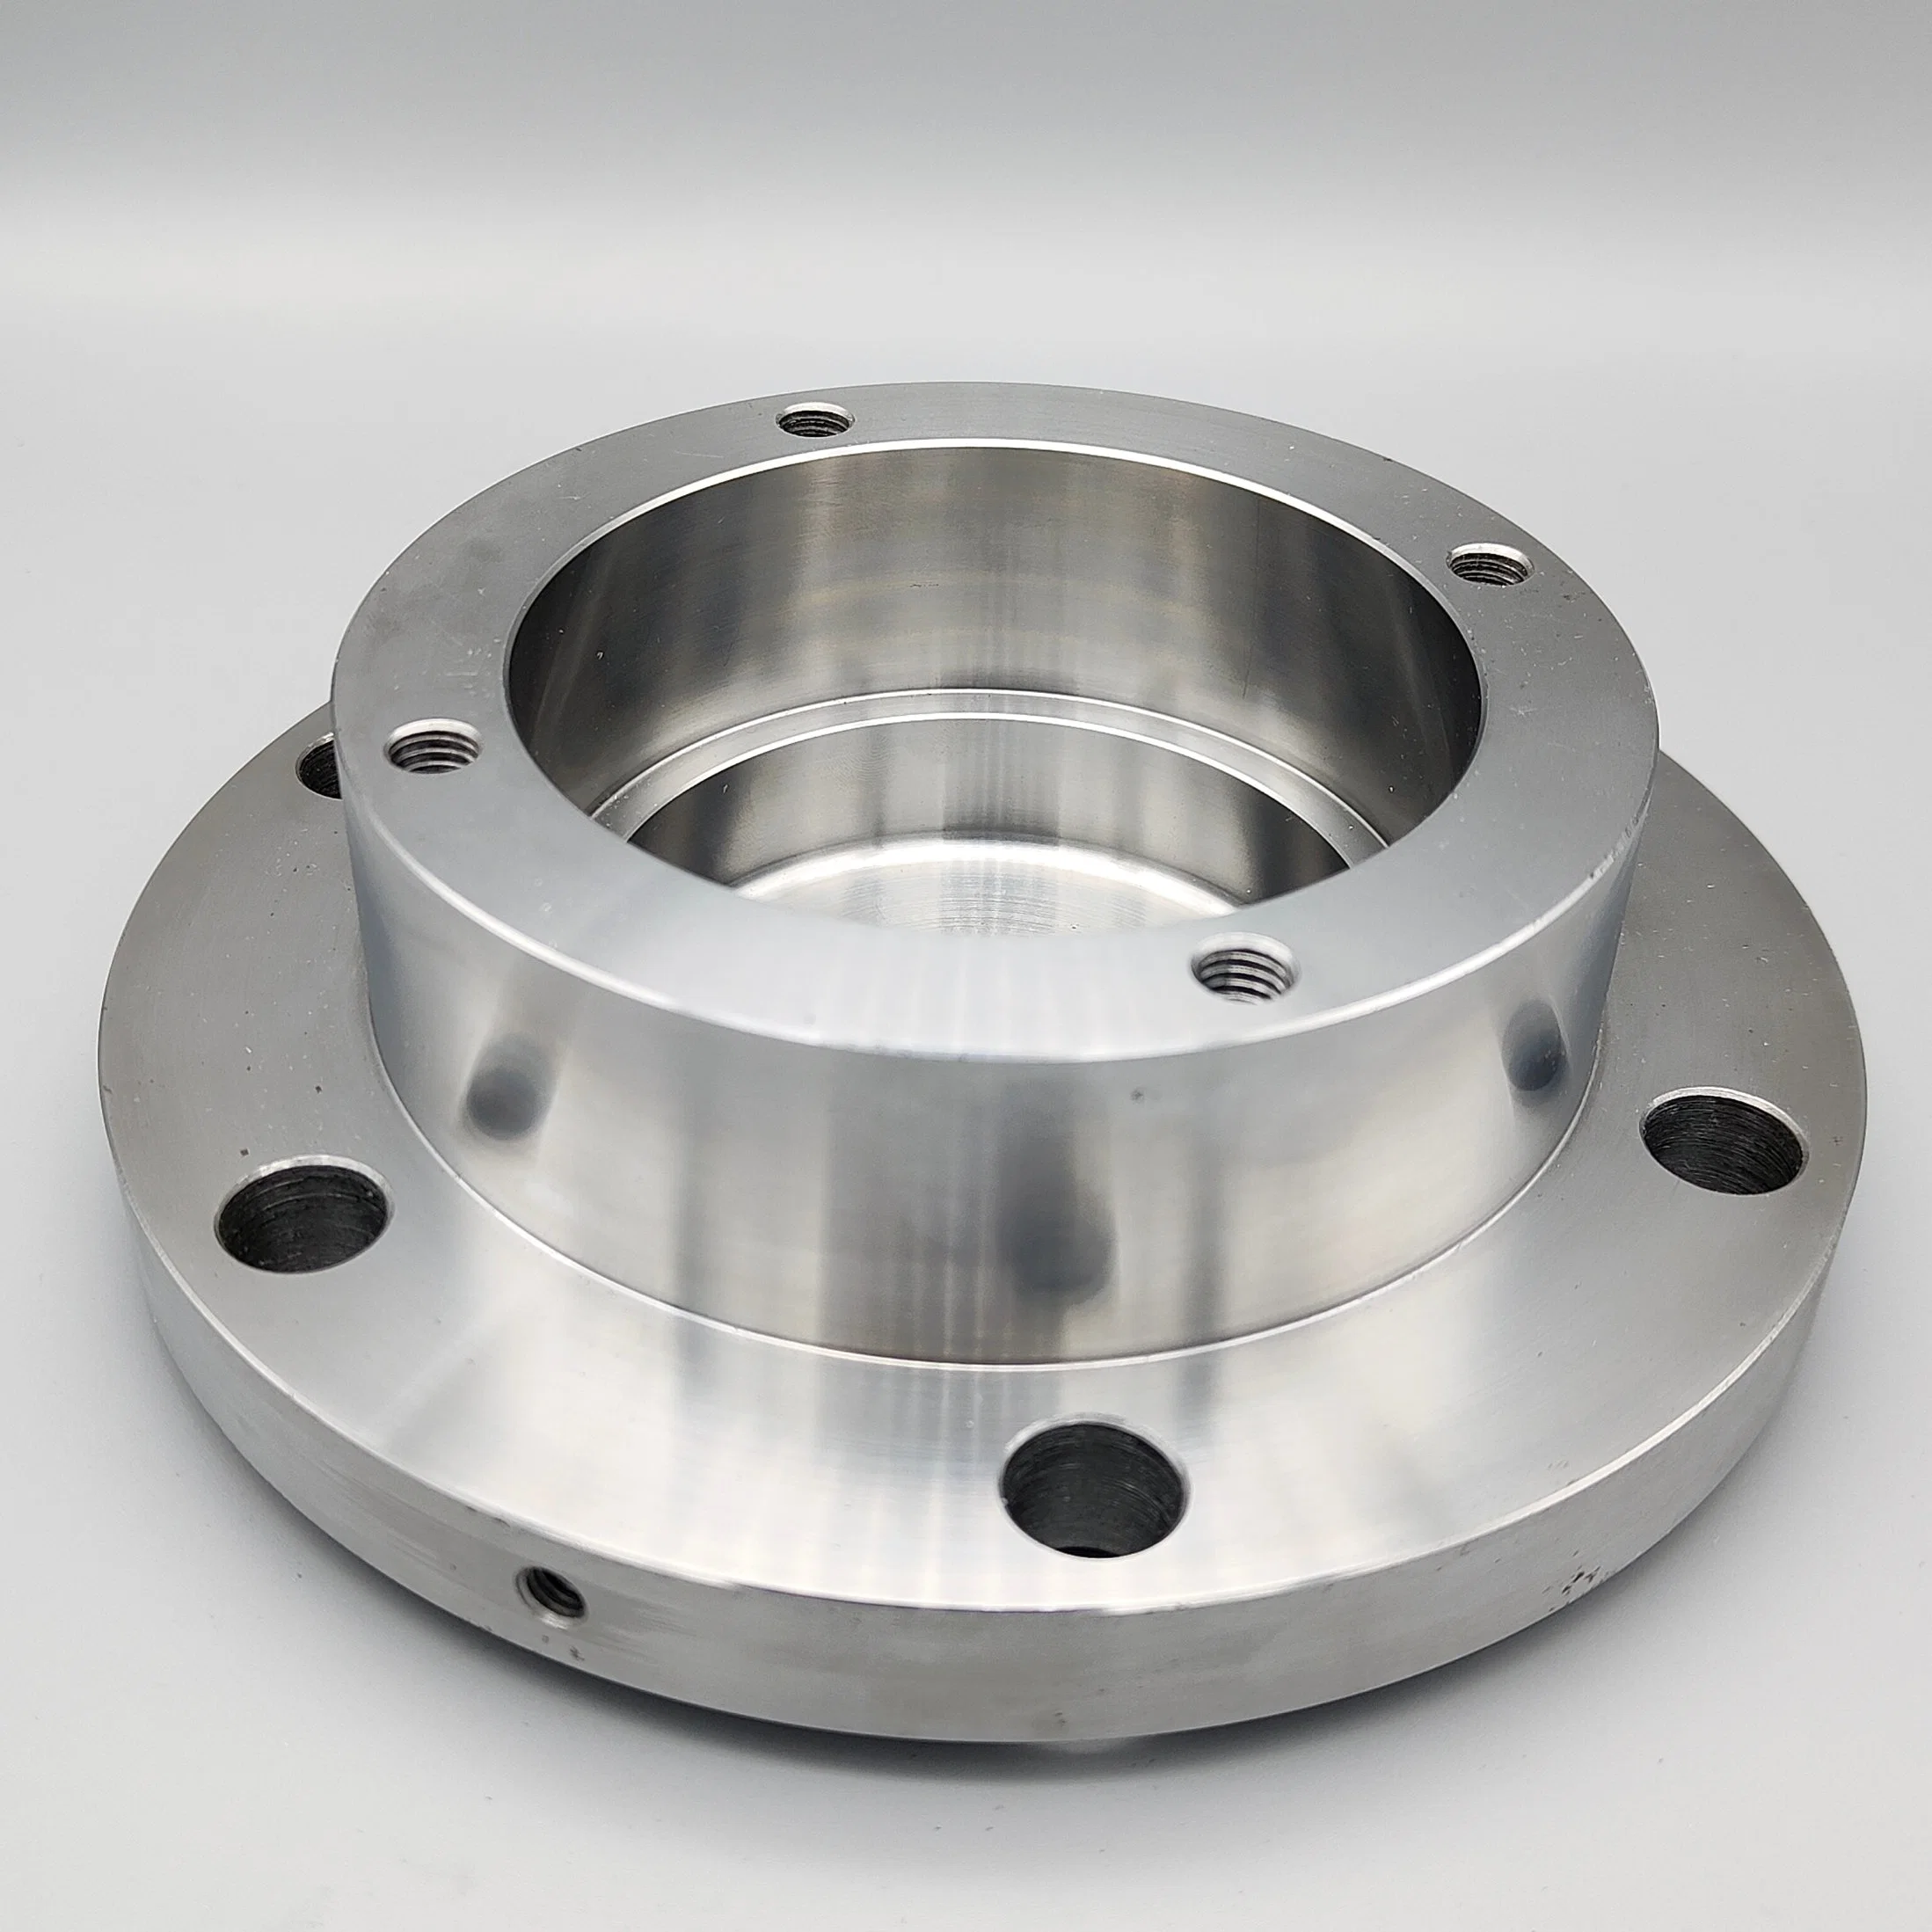 OEM Investment Casting Lock Parts Metal Parts with Precision Machining Tolerance